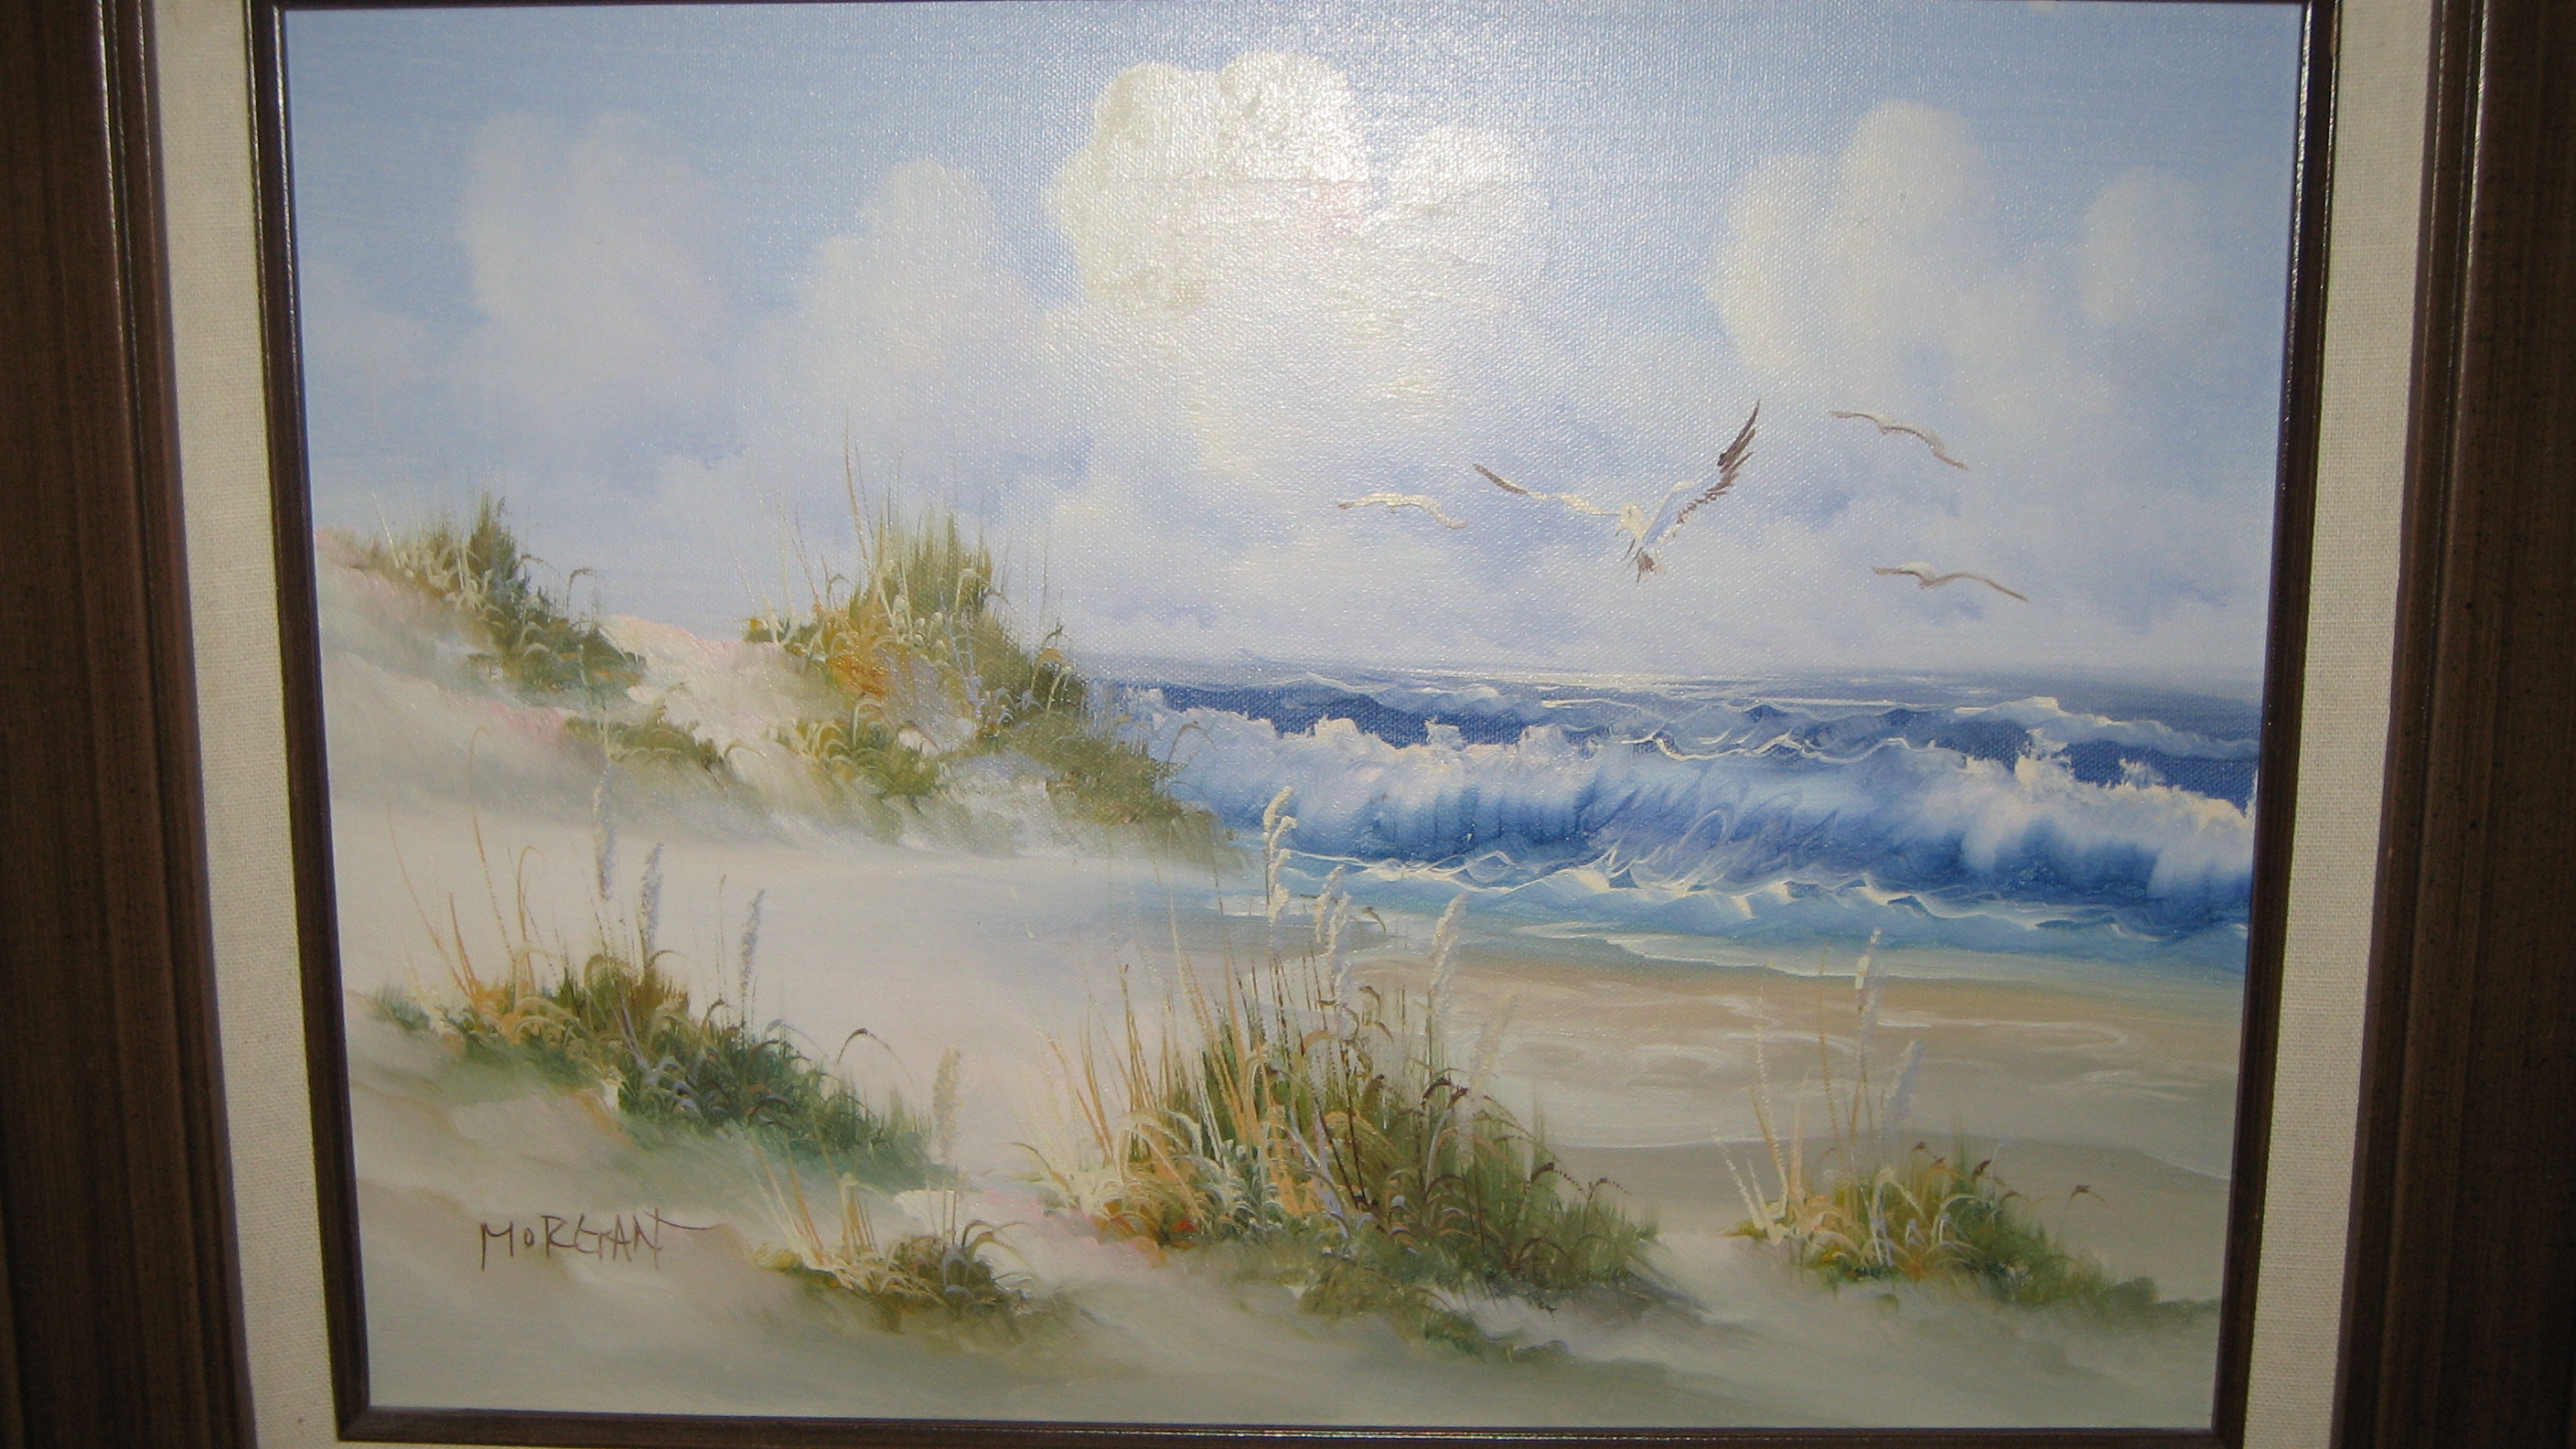 Sea Scape Oil Painting in Shadow Box Solid Wood Frame